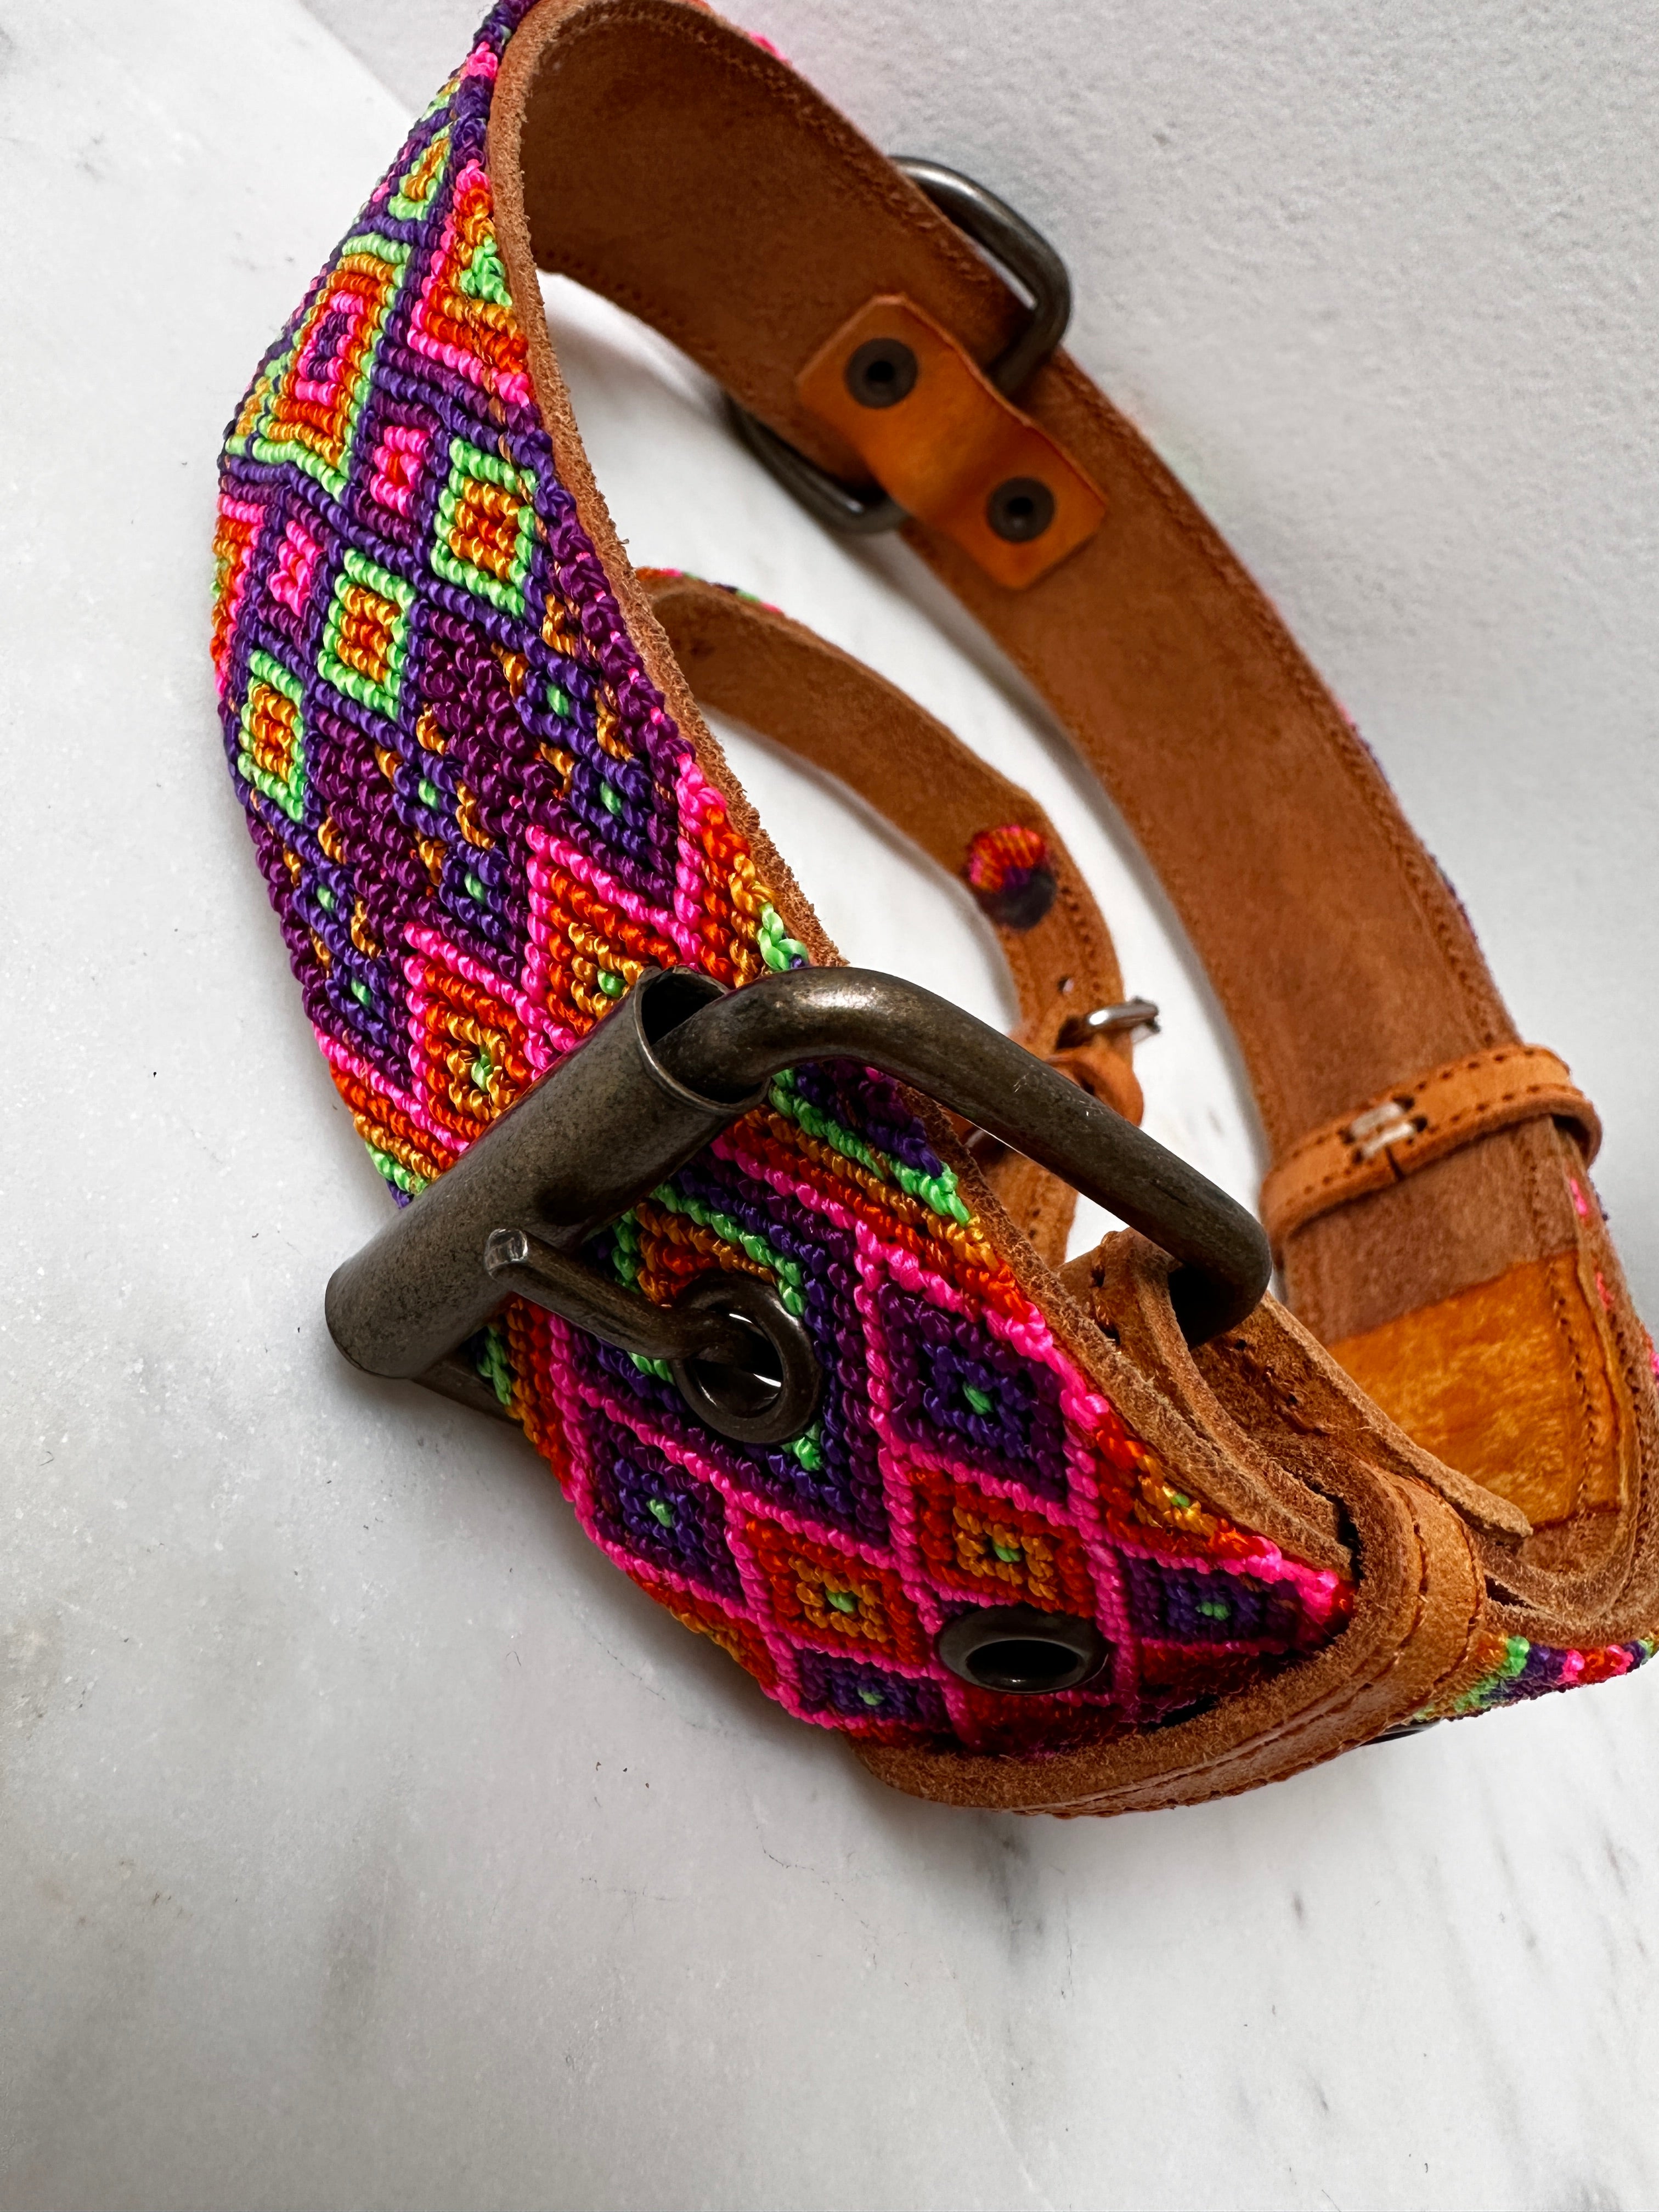 Future Nomads Homewares One Size Huichol Embroidered Wide Dog Collar XL6